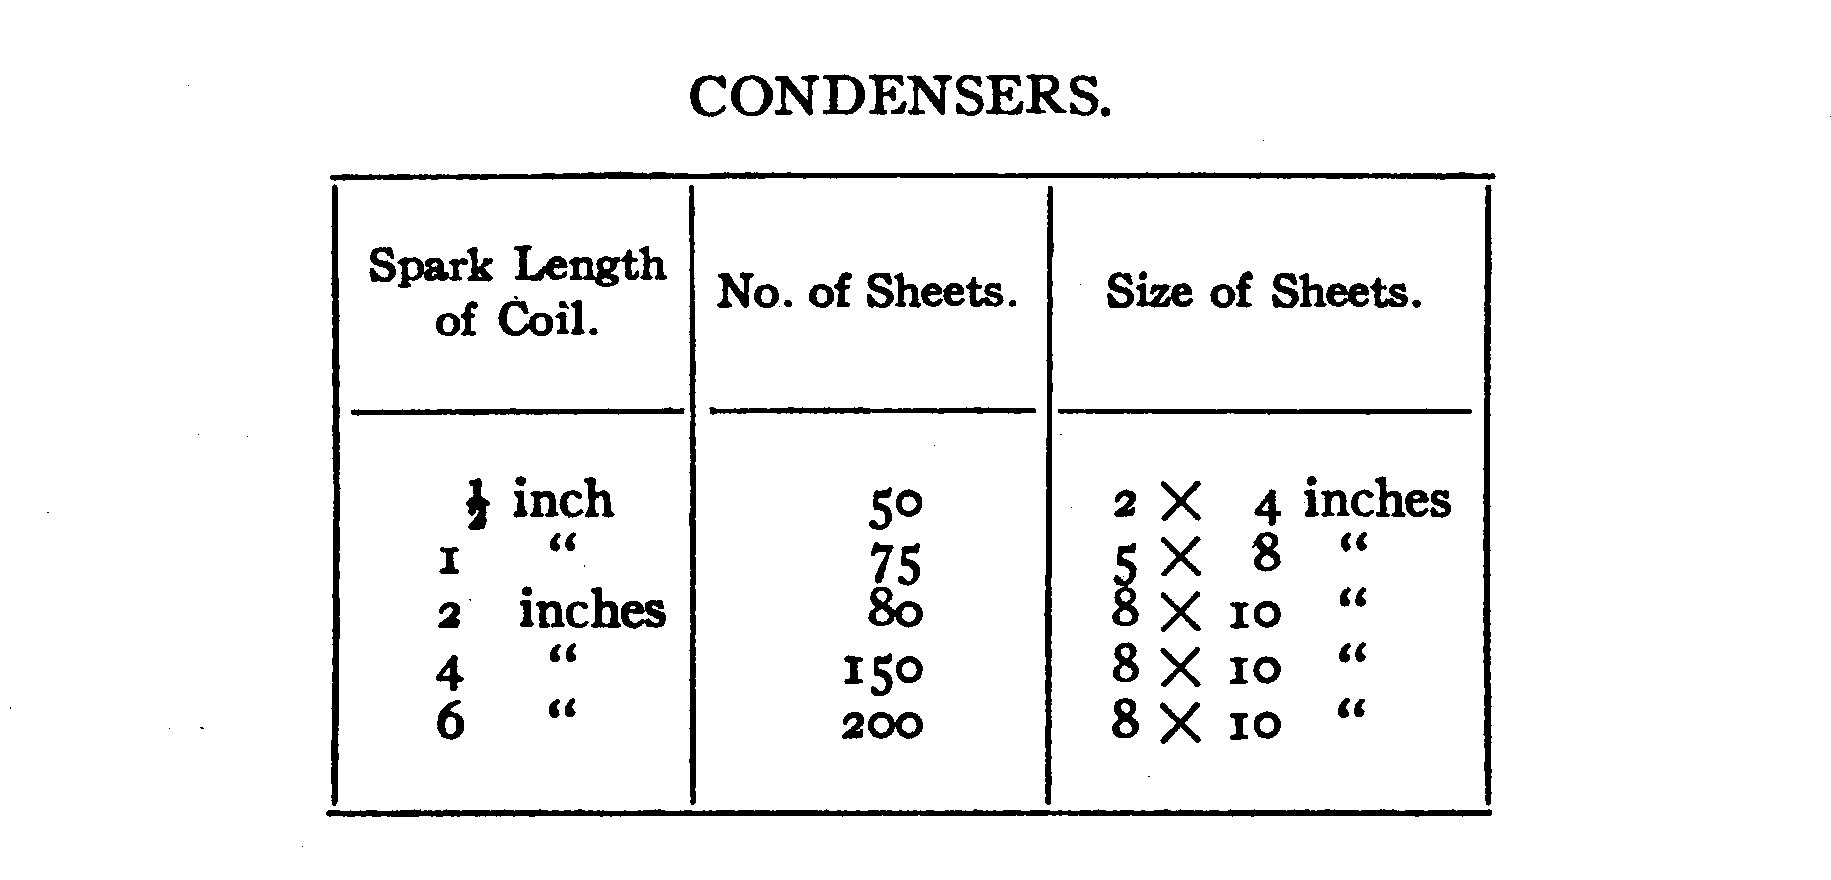 CONDENSERS TABLE.